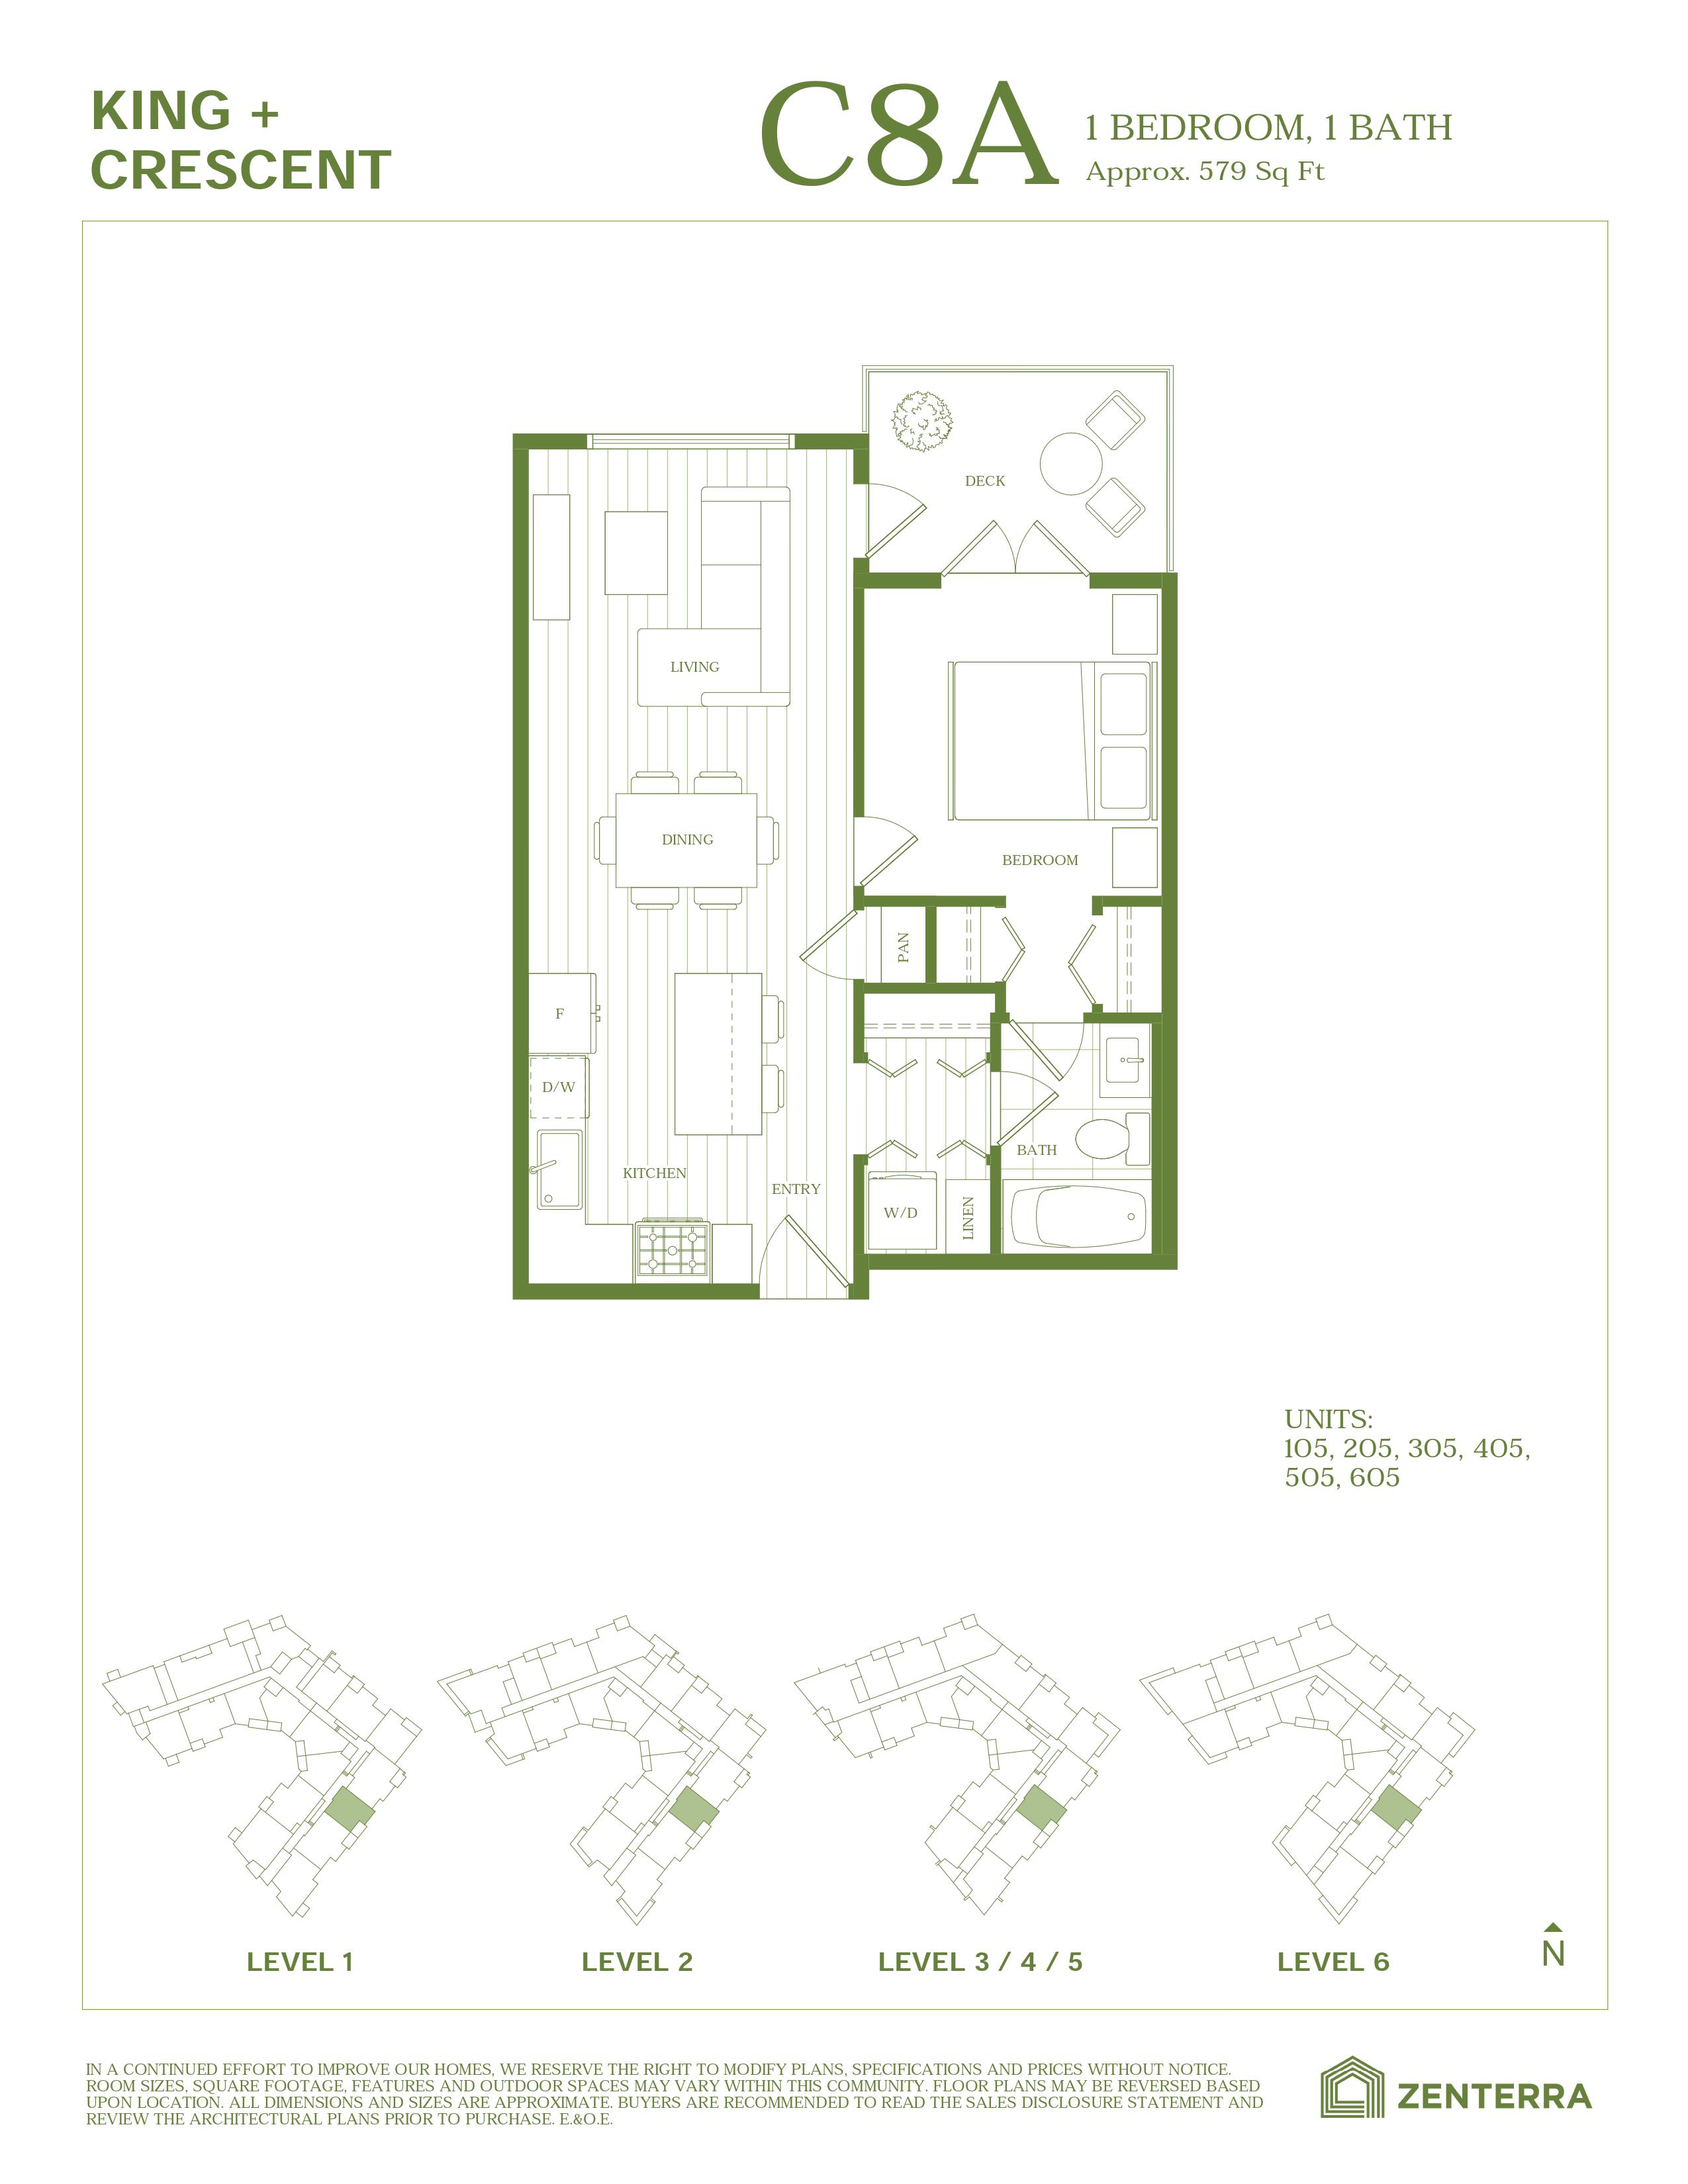 C8A Floor Plan of King + Crescent Condos with undefined beds